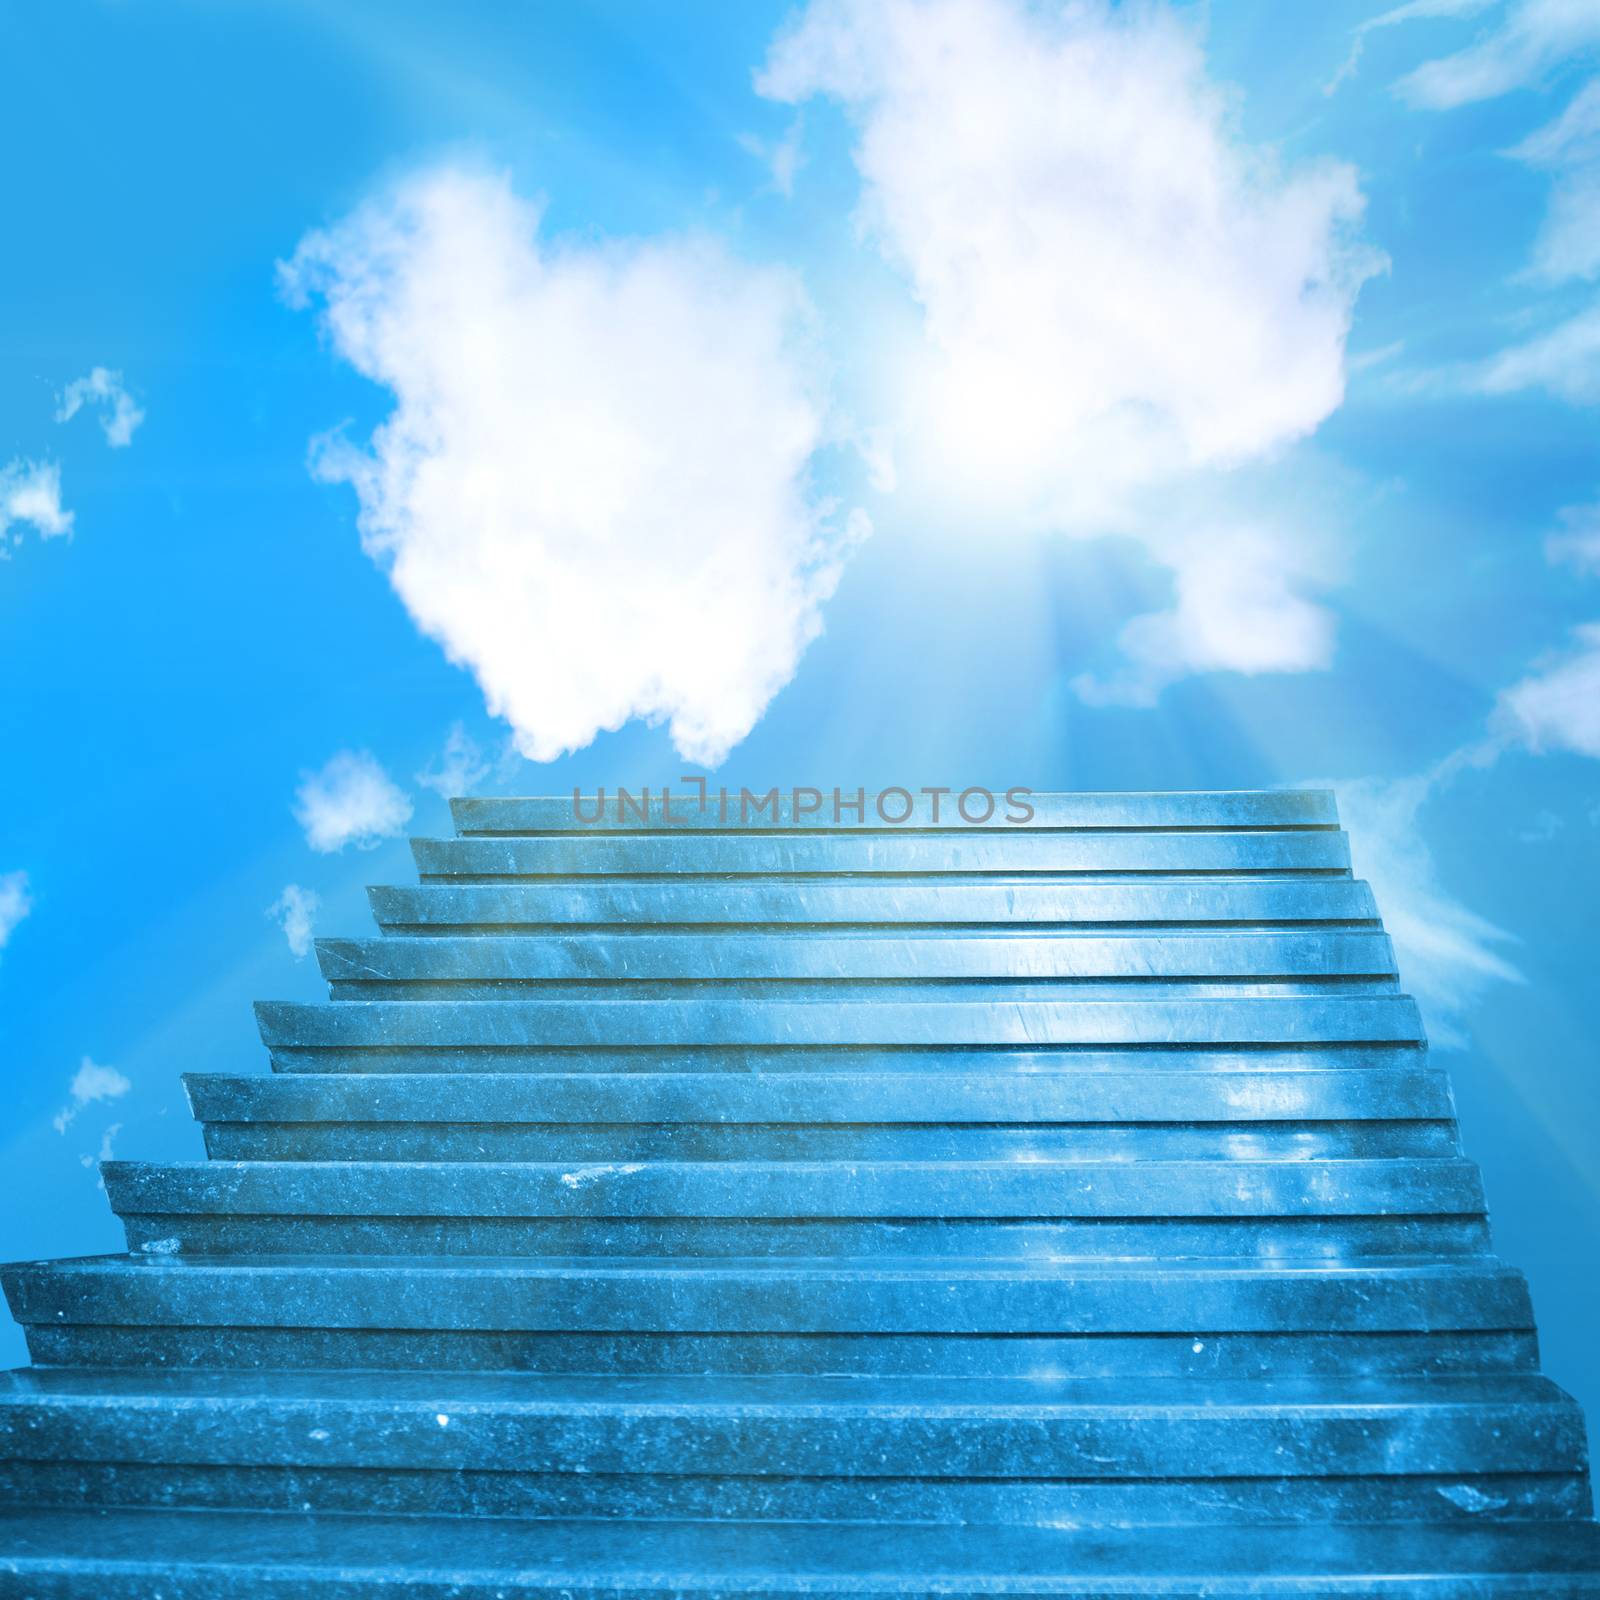 Stairway to heaven. Stairs towards sun on the blue sky with clouds